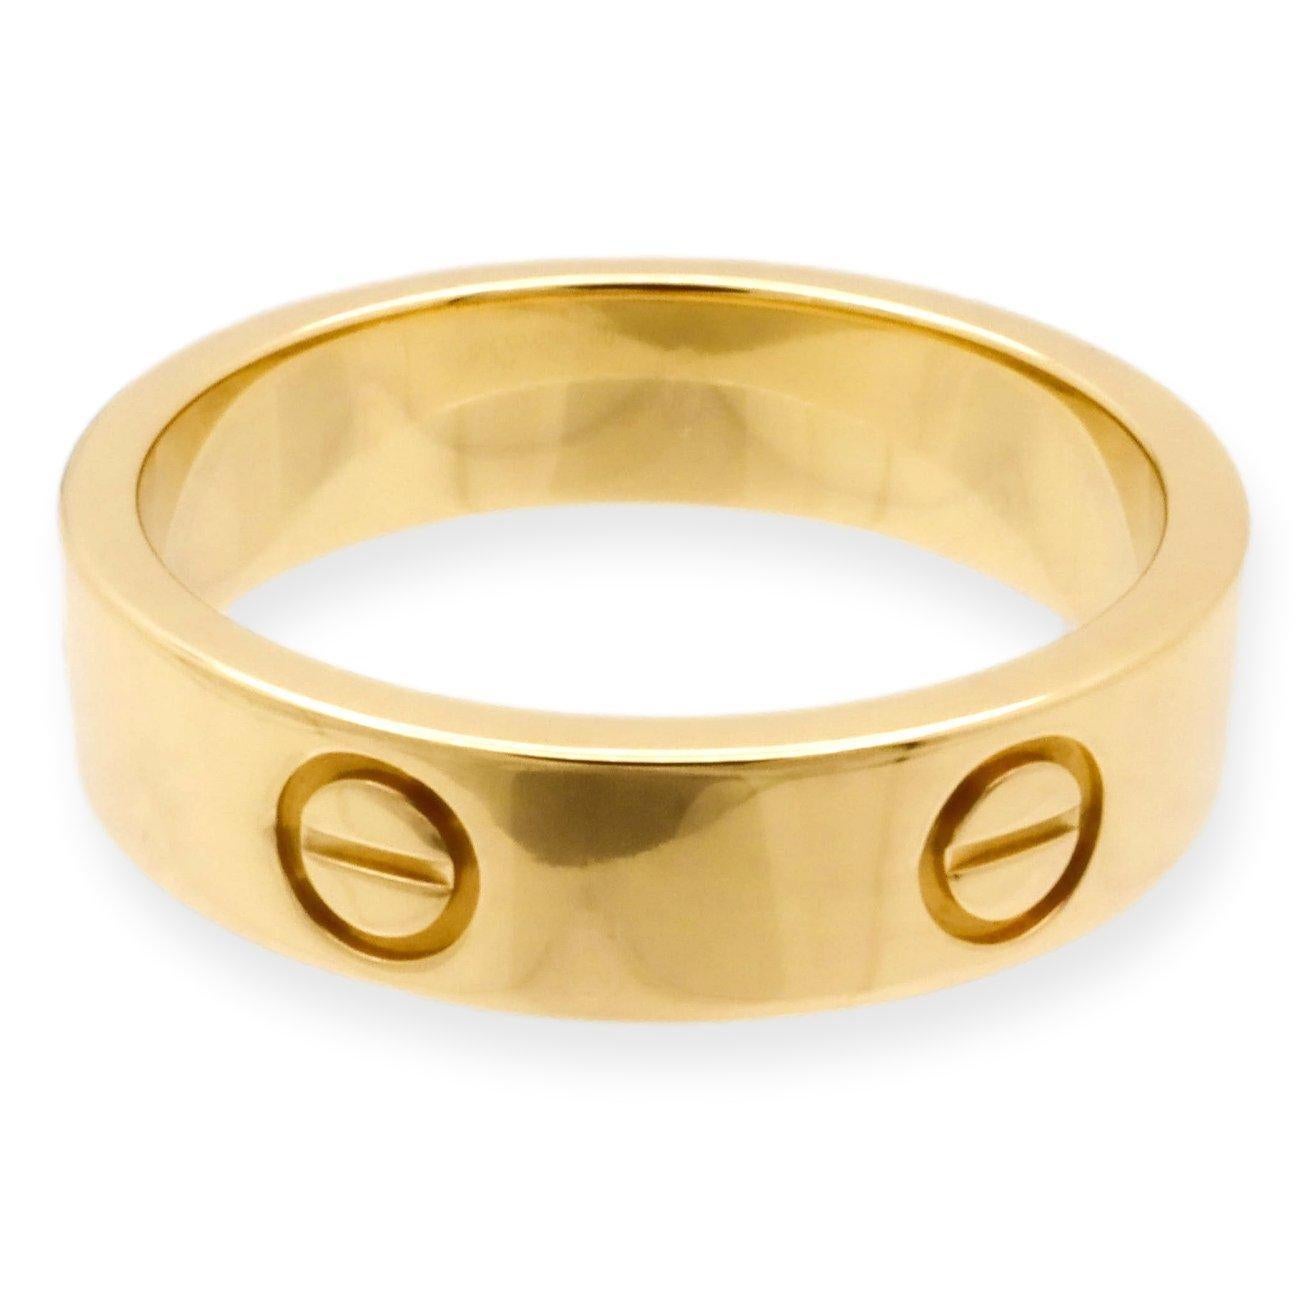 Cartier ring from the LOVE collection finely crafted in 18 karat yellow gold with screw motifs. Measures 5.5 mm wide. Ring is fully hallmarked with logo , serial numbers, size and metal content.

Ring Specifications
Brand: Cartier
Style: Love